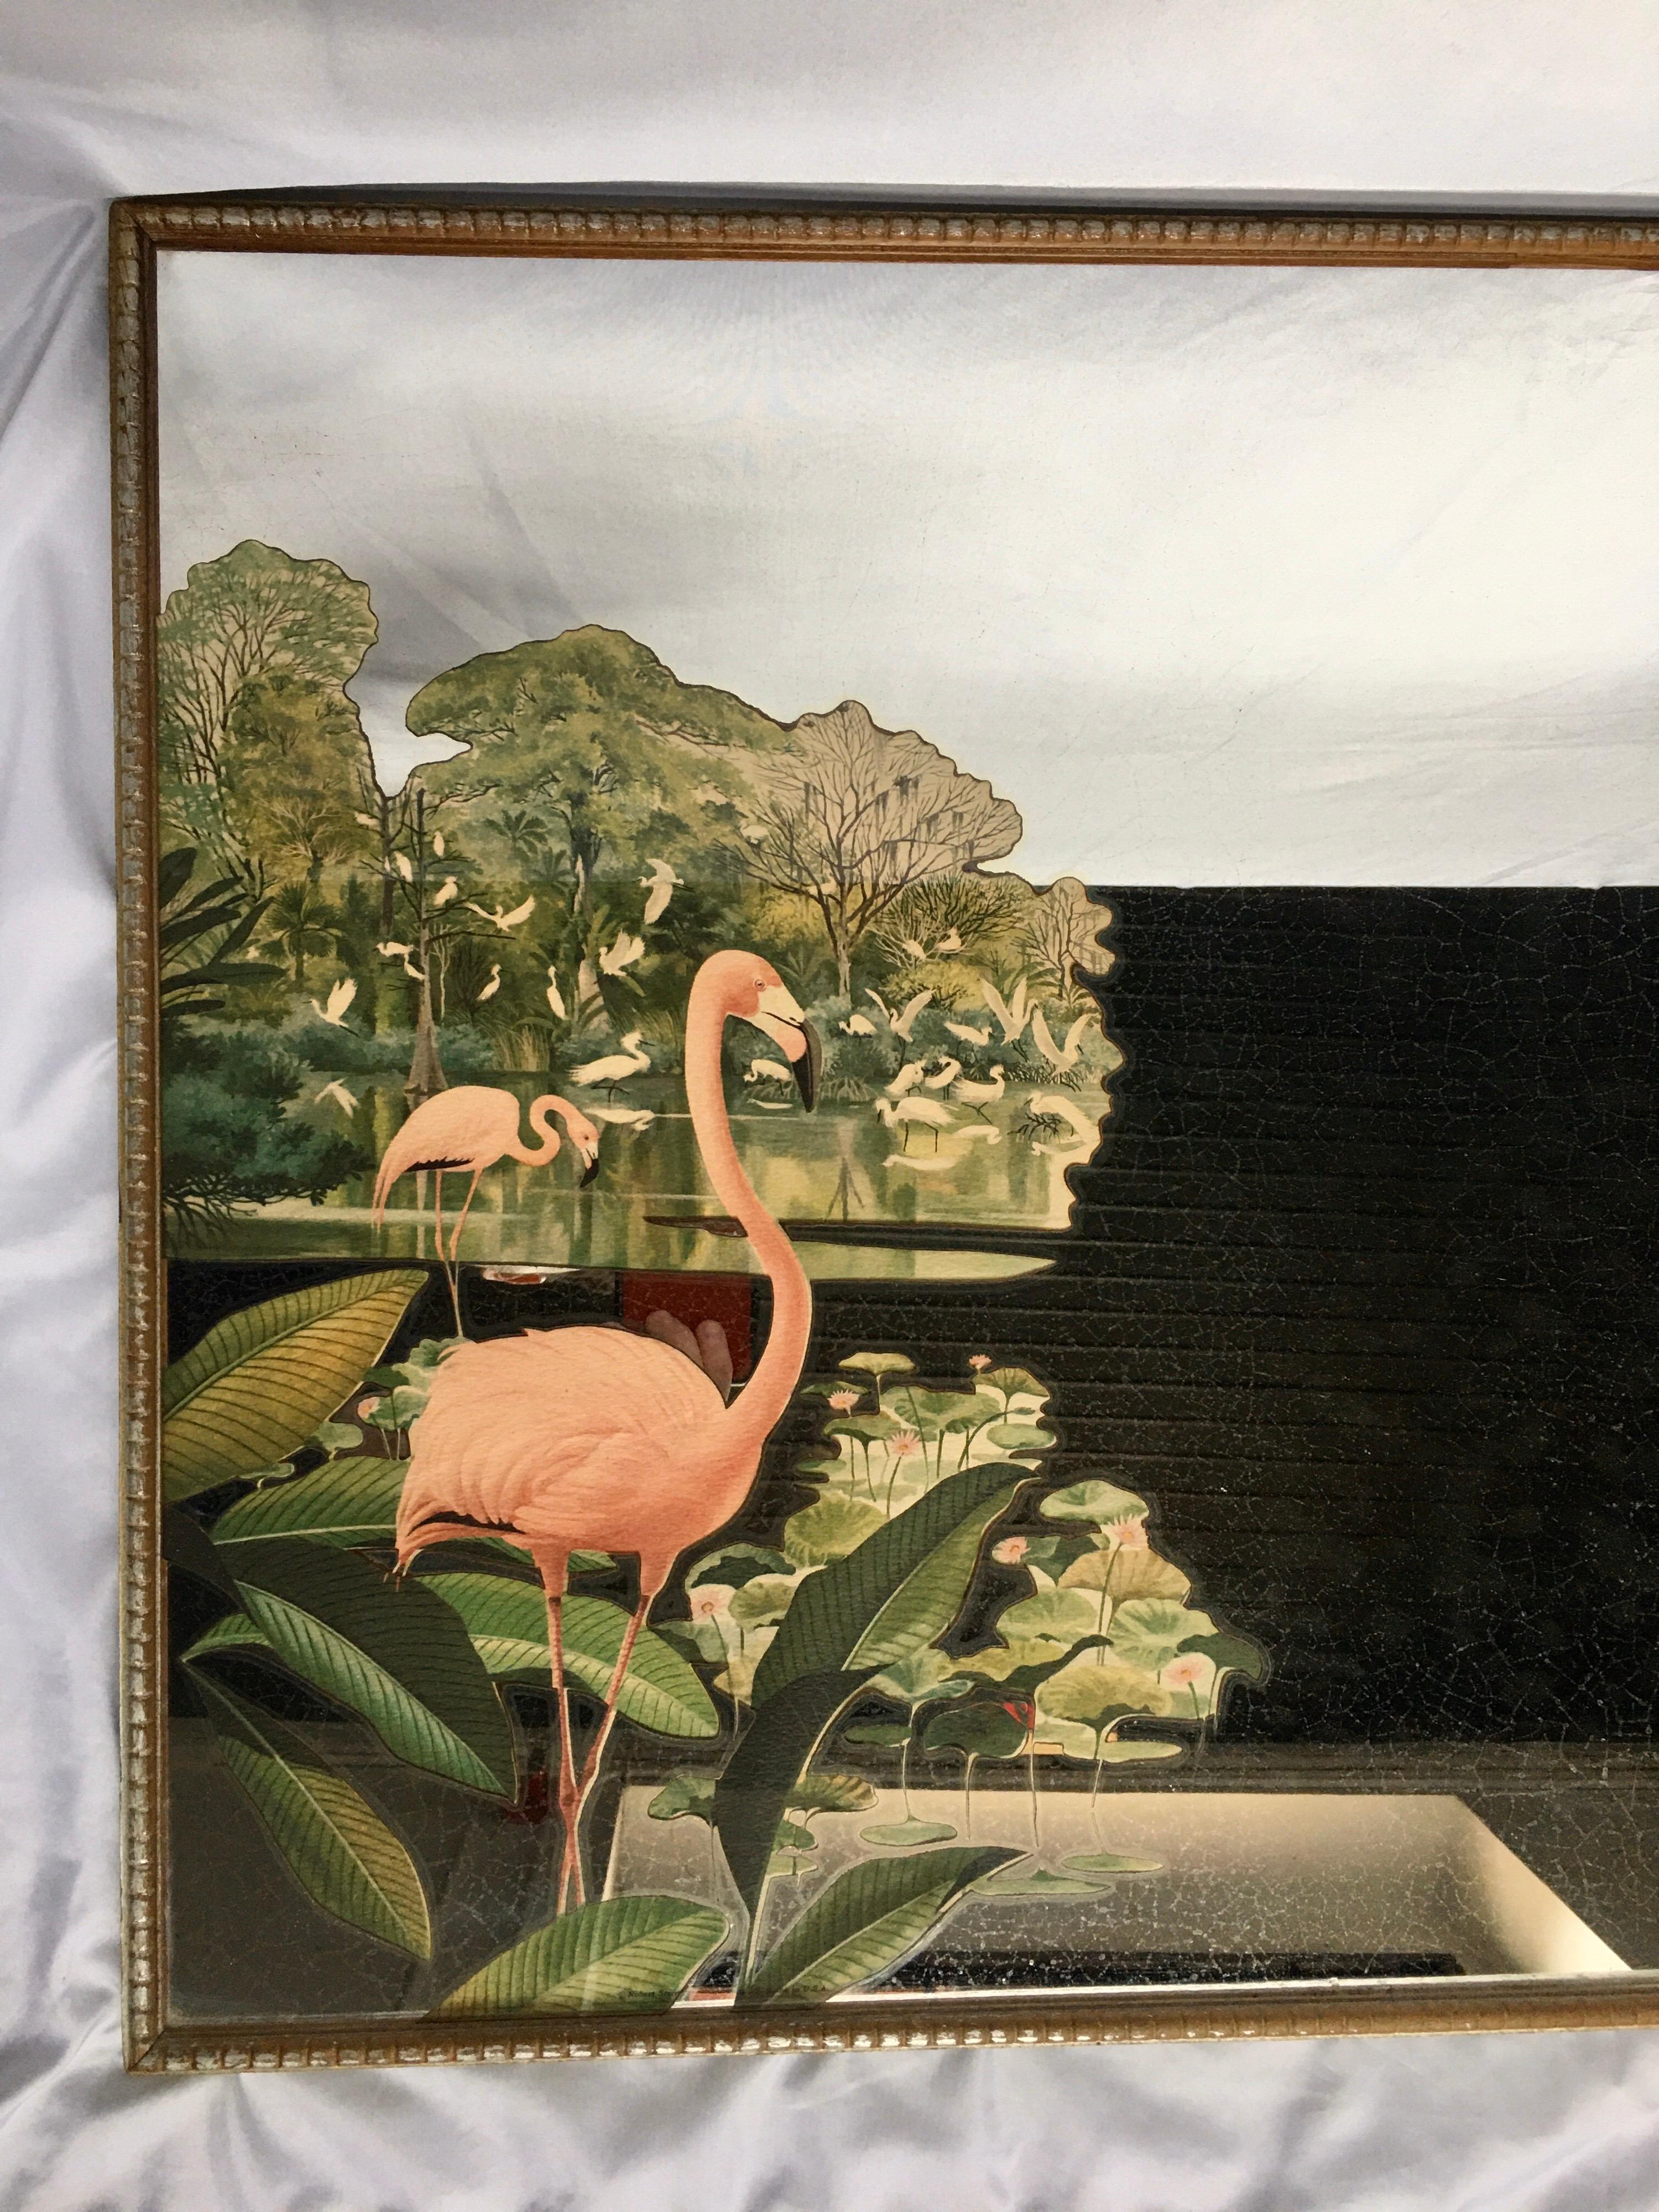 Hollywood Regency decorative wall mirror featuring a painted tropical design of pink flamingos and palm leaves. This midcentury mirrored art piece is framed in a gold/silver tone wood frame, circa mid-20th century. Pair available.